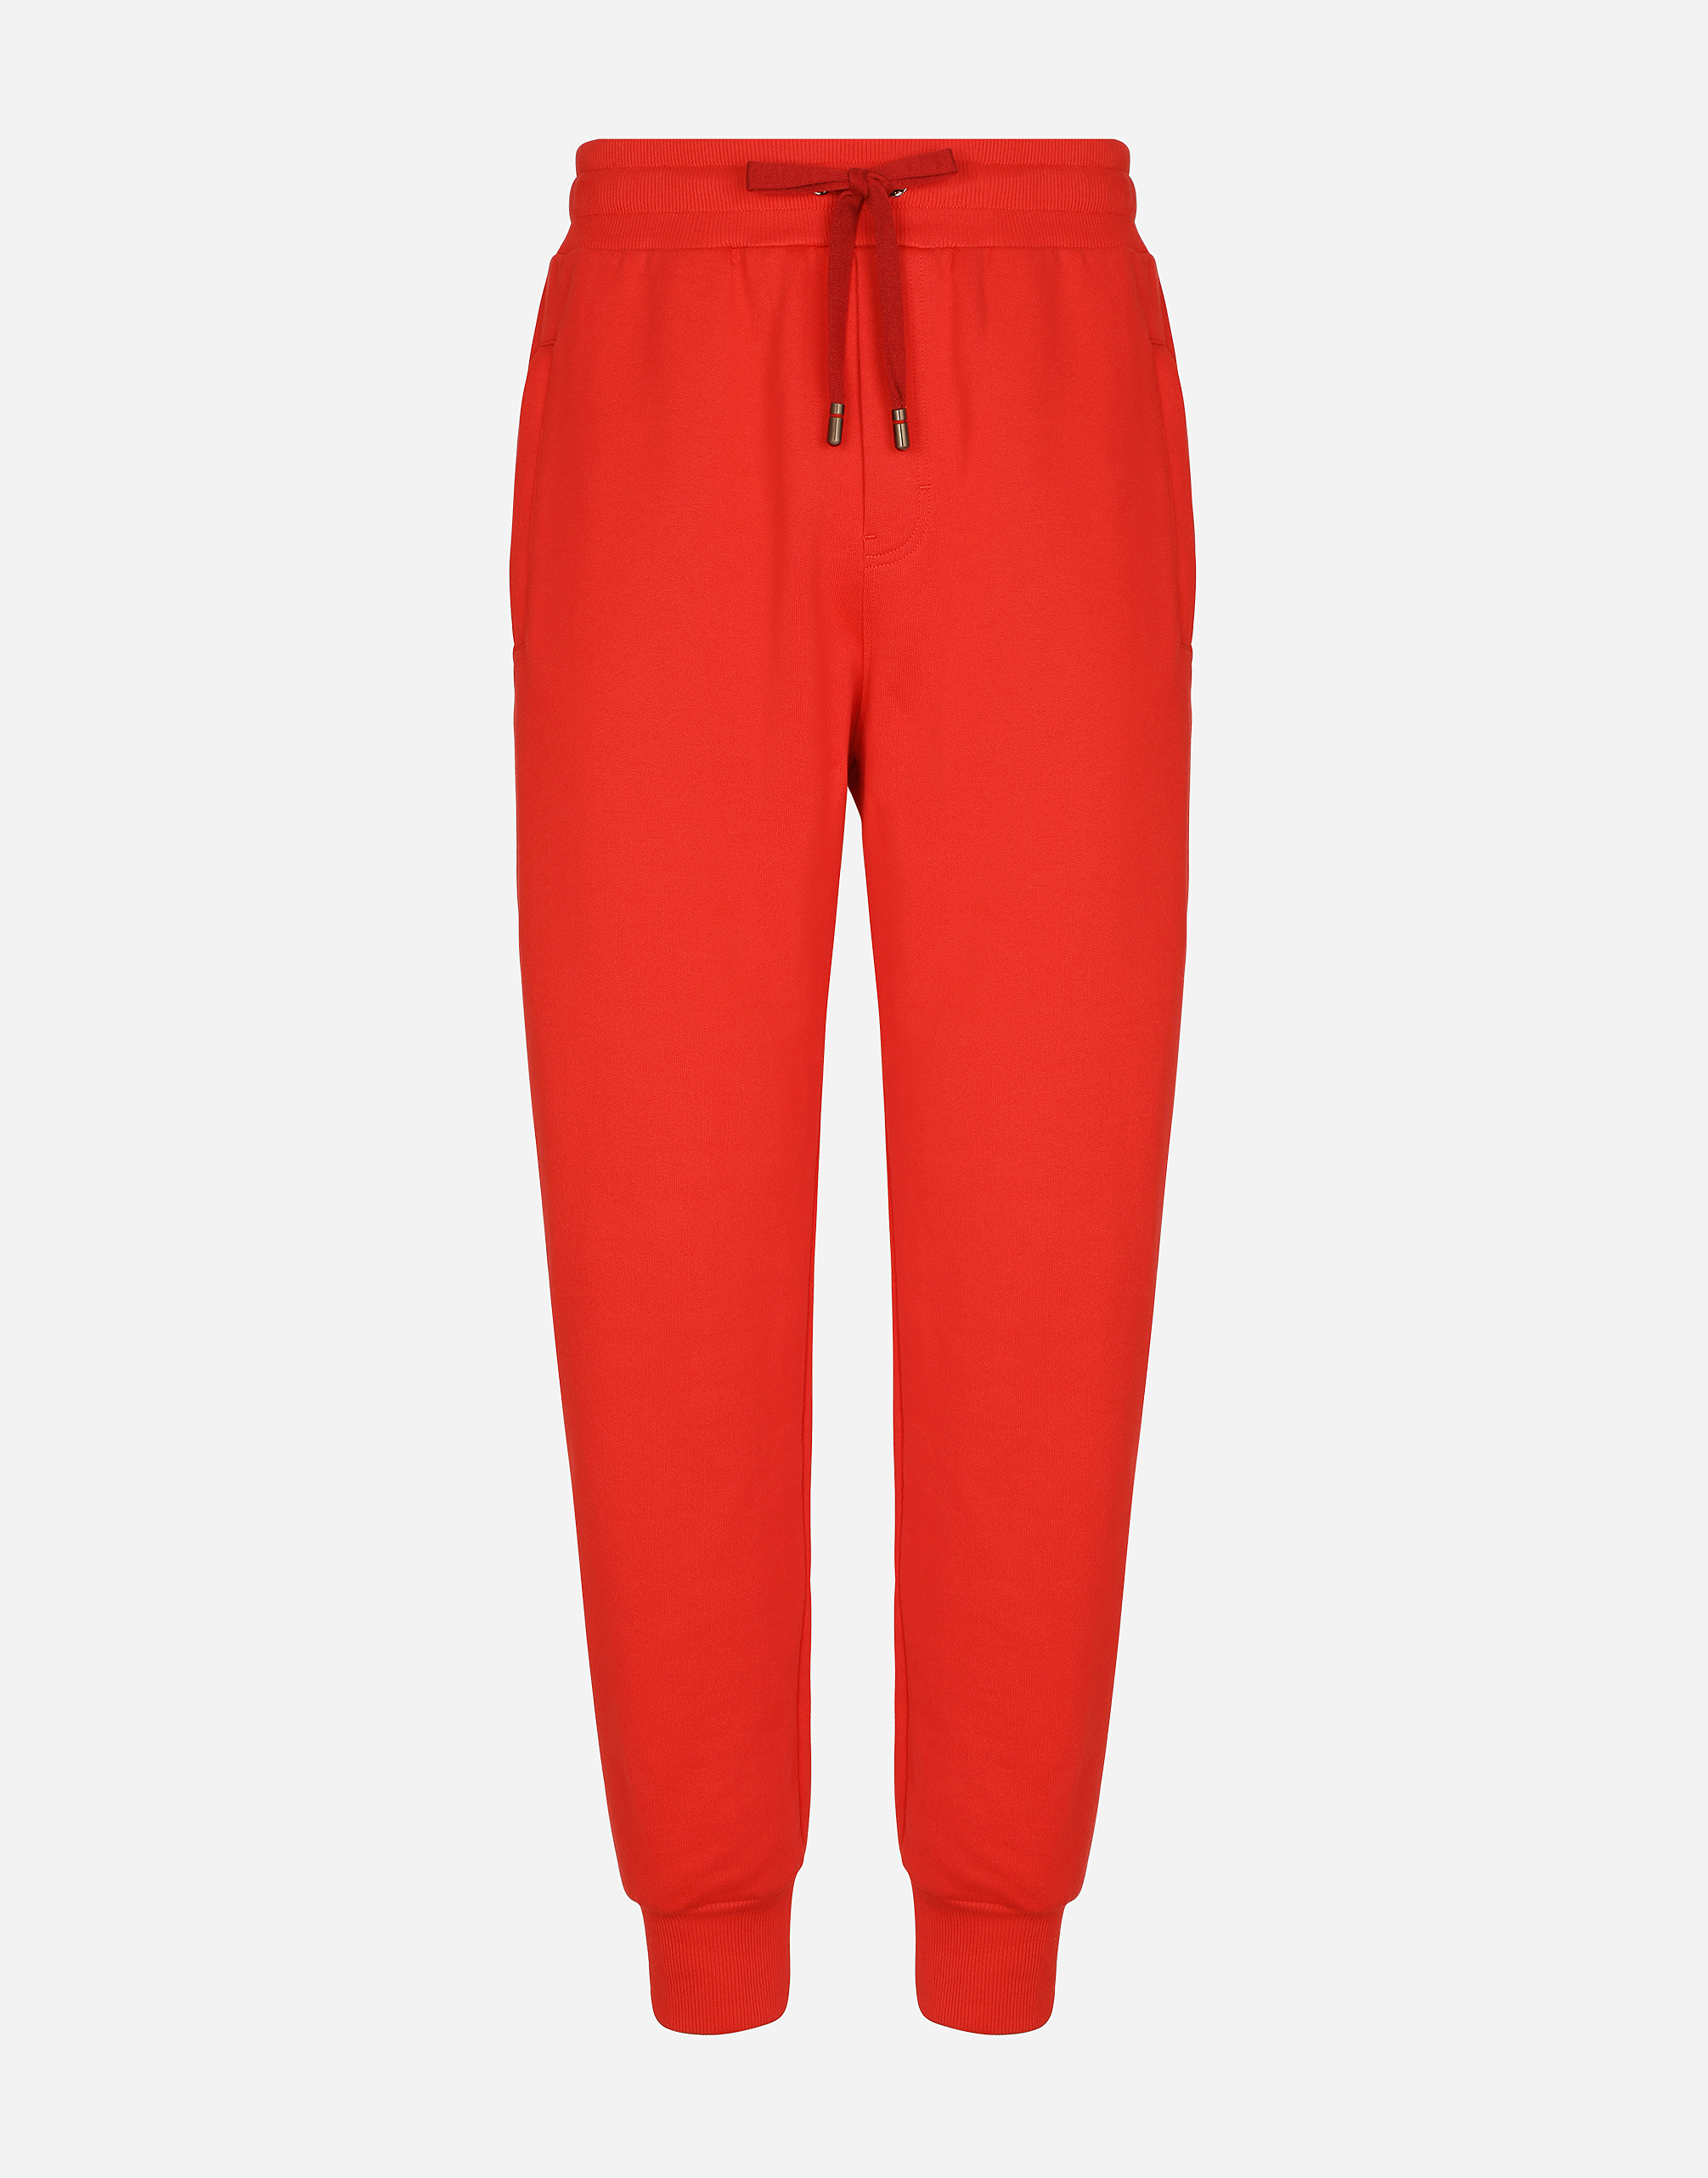 Jersey jogging pants with embossed tag in Red